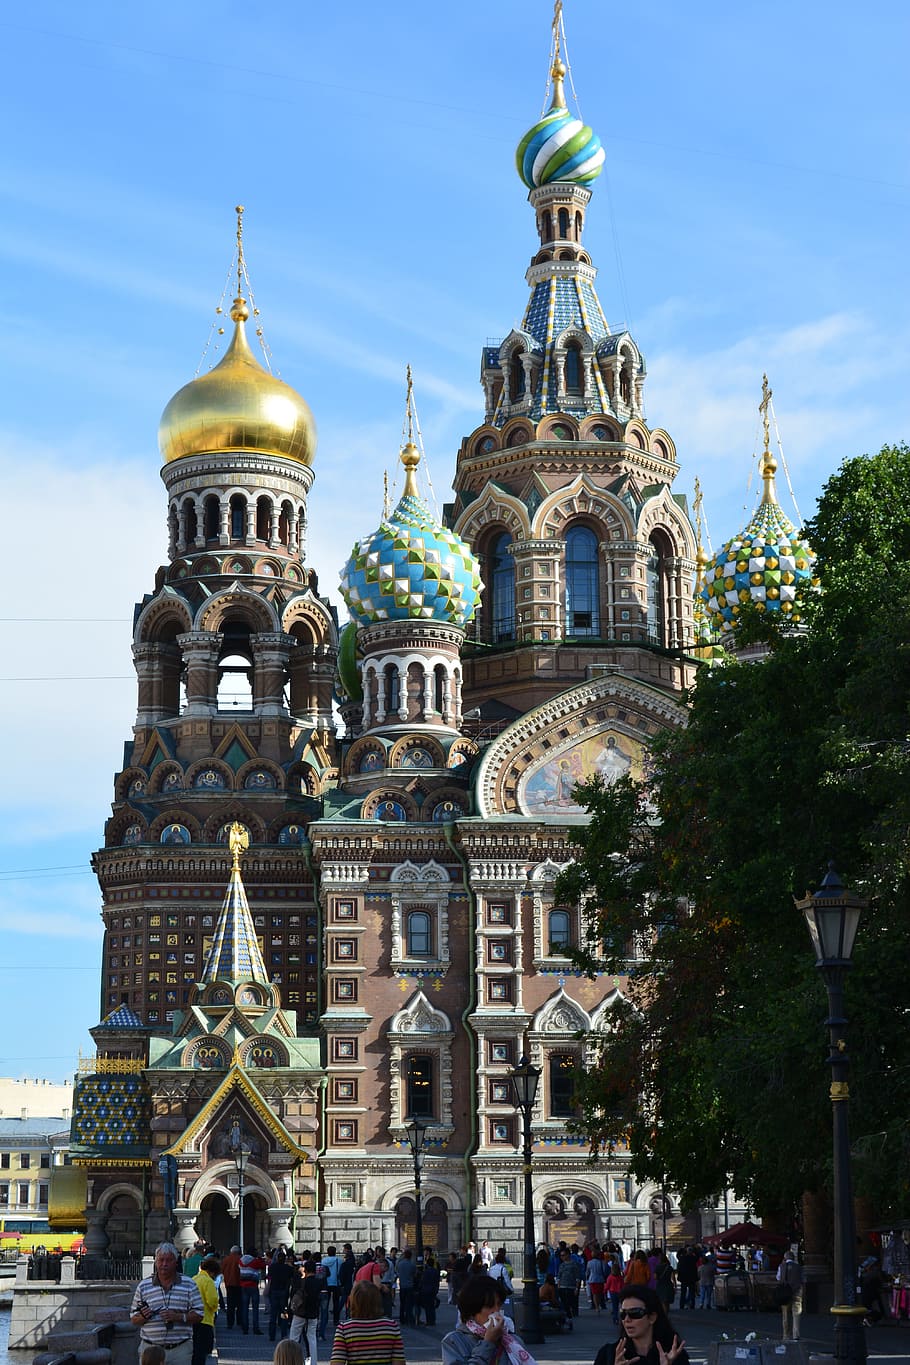 saint basil's cathedral, st petersburg, russia, historically, sankt petersburg, places of interest, tourism, church, petersburg, onion domes